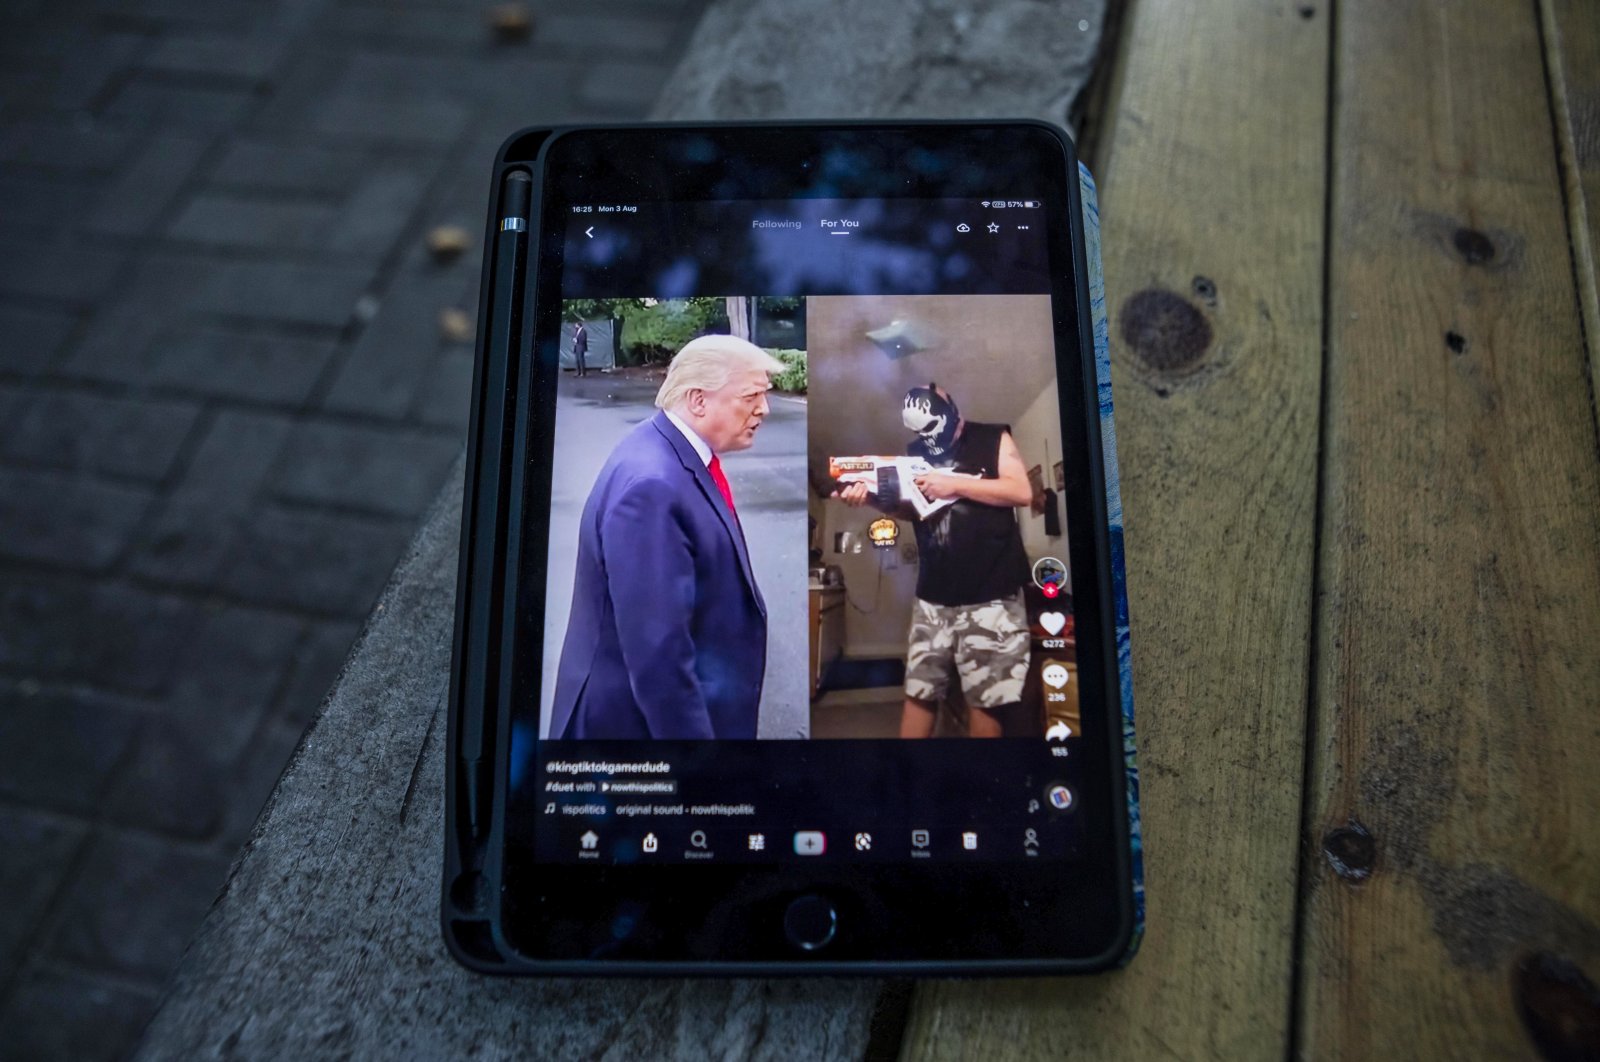 U.S. President Donald Trump is seen in a TikTok app post on a phone resting on a bench in Shanghai, China, Aug. 3, 2020. (EPA Photo)